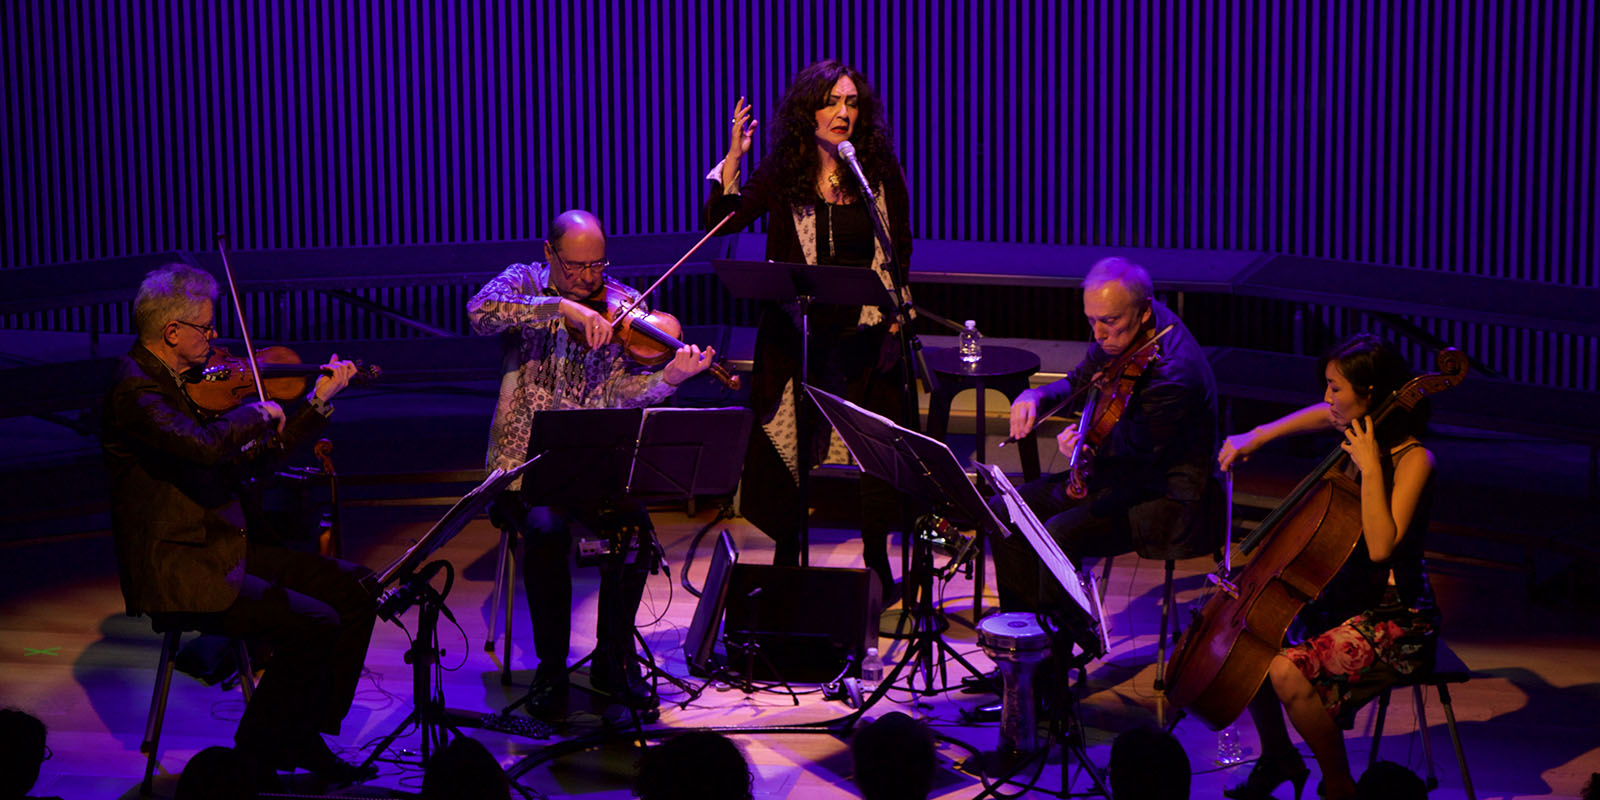 Kronos Quartet and Mahsa Vahdat performing on stage.